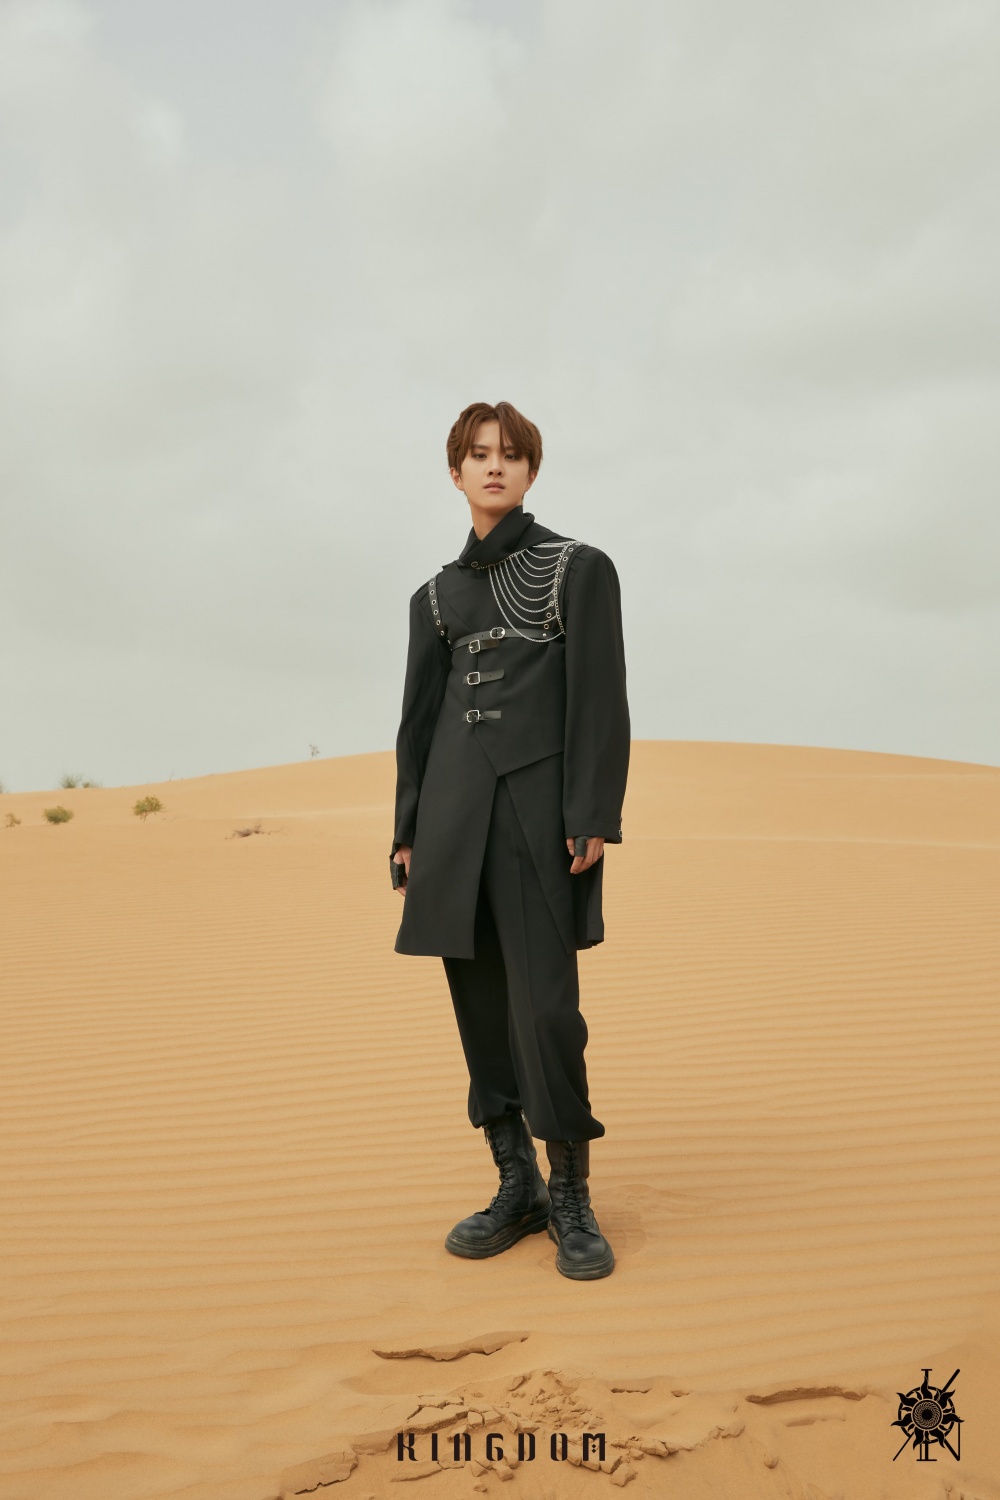 KINGDOM releases new group concept photos... Charisma in an exotic setting